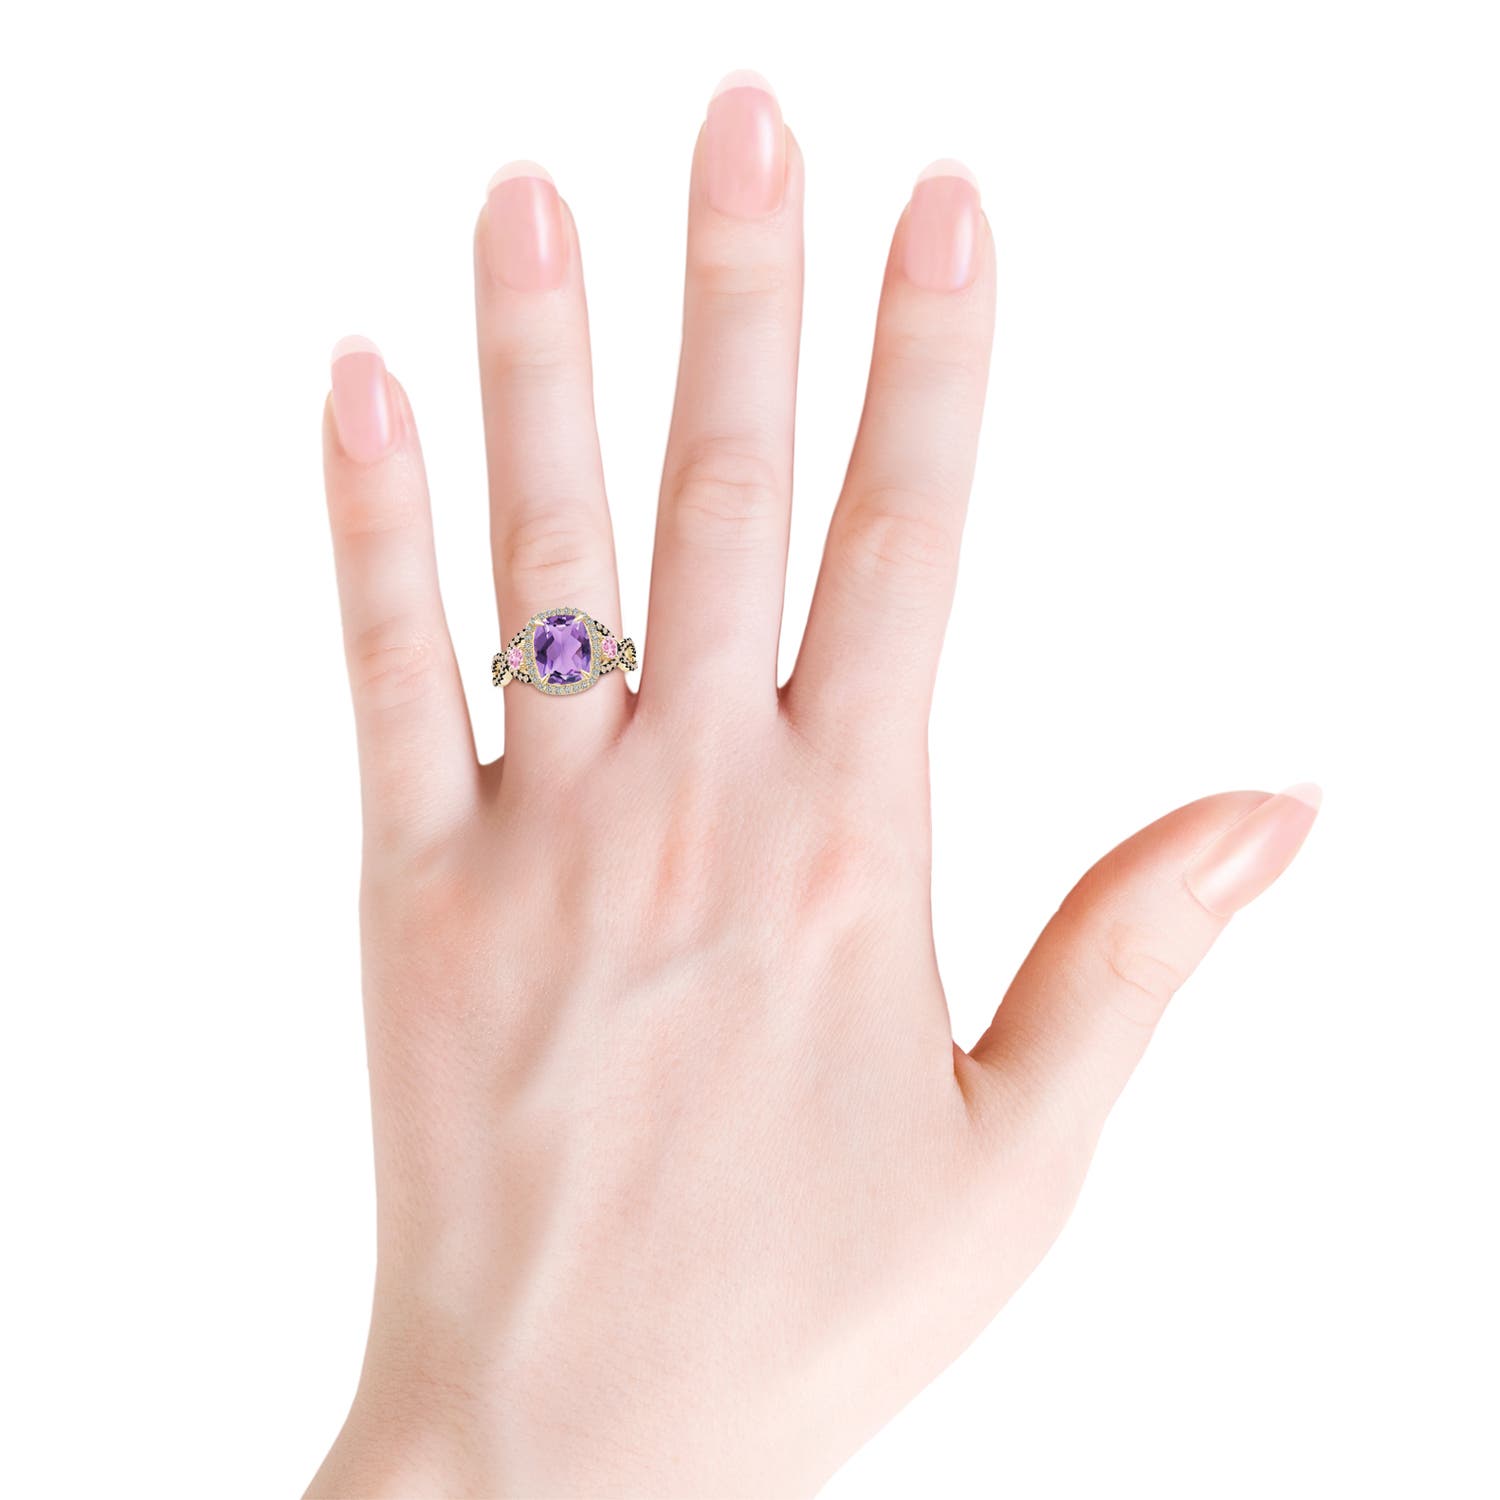 A - Amethyst / 2.59 CT / 14 KT Yellow Gold